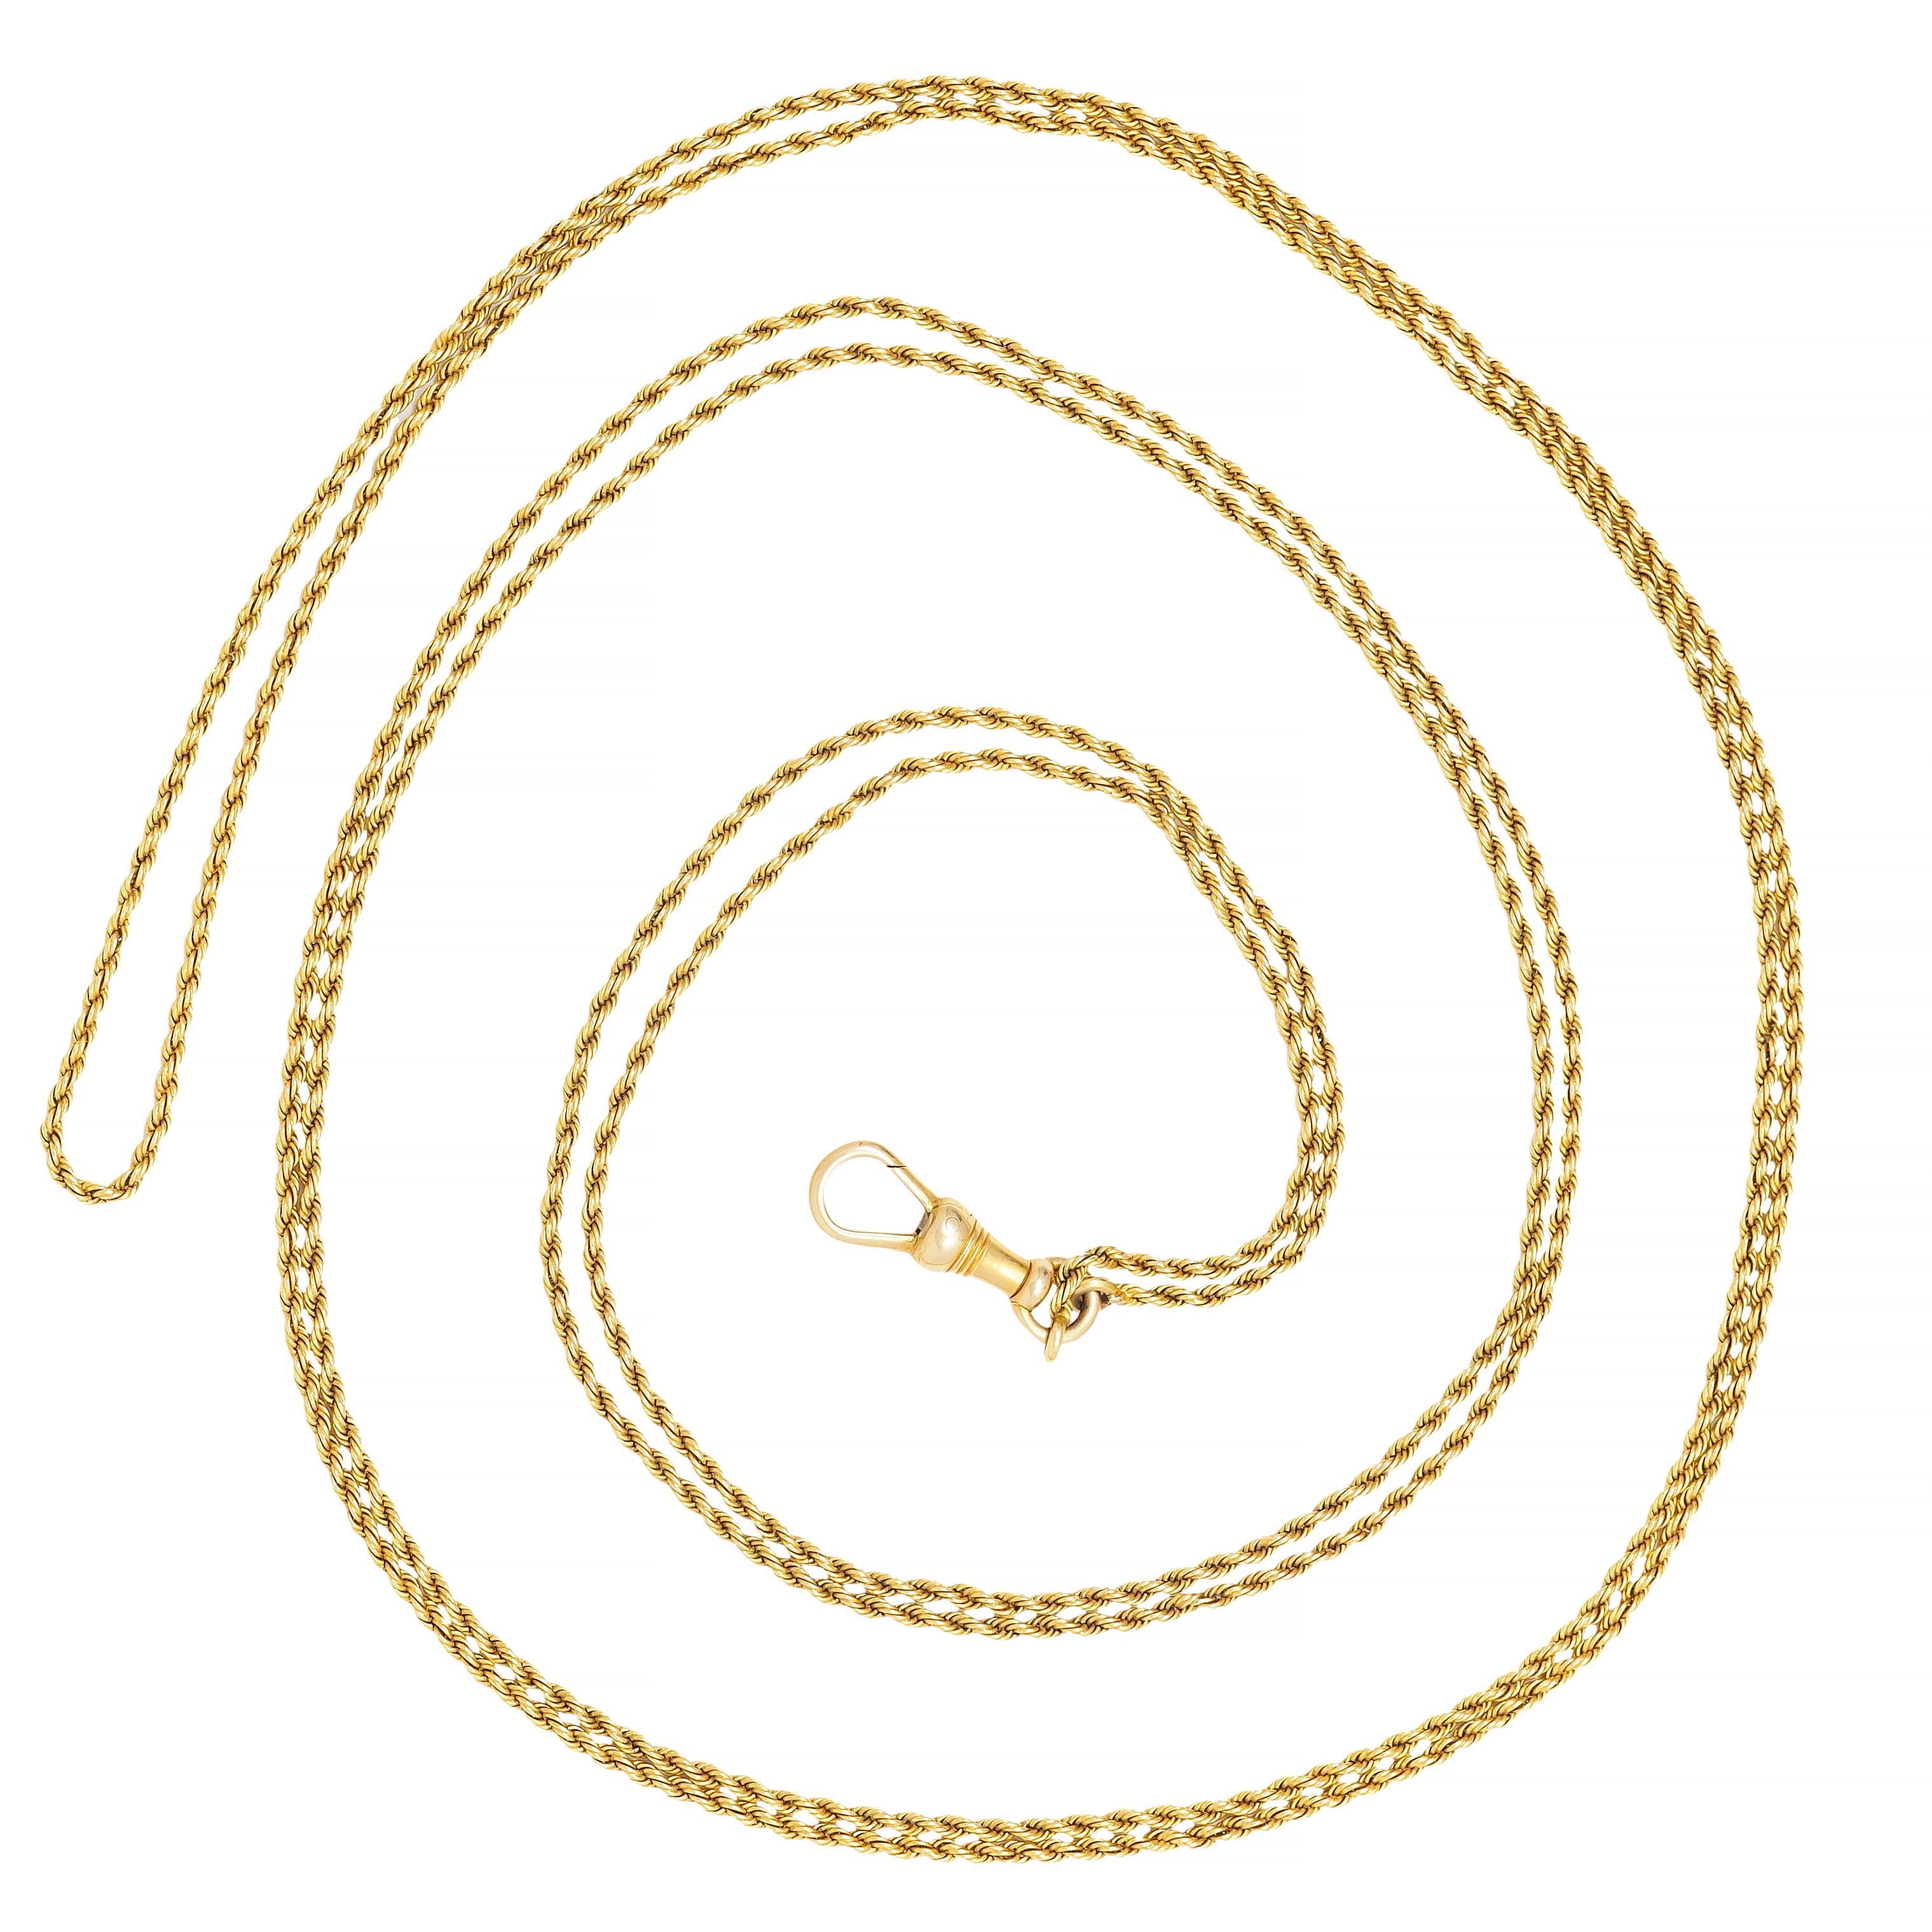 Designed as a 1.5 mm twisted rope chain 
Terminating with a hinged fob lobster clasp 
Stamped for 14 karat gold
With maker's mark
Circa: 1870s
Width at widest: 1/4 inch
Length: 49 1/2 inches - including fob clasp
Total weight: 11.7 grams
Stock